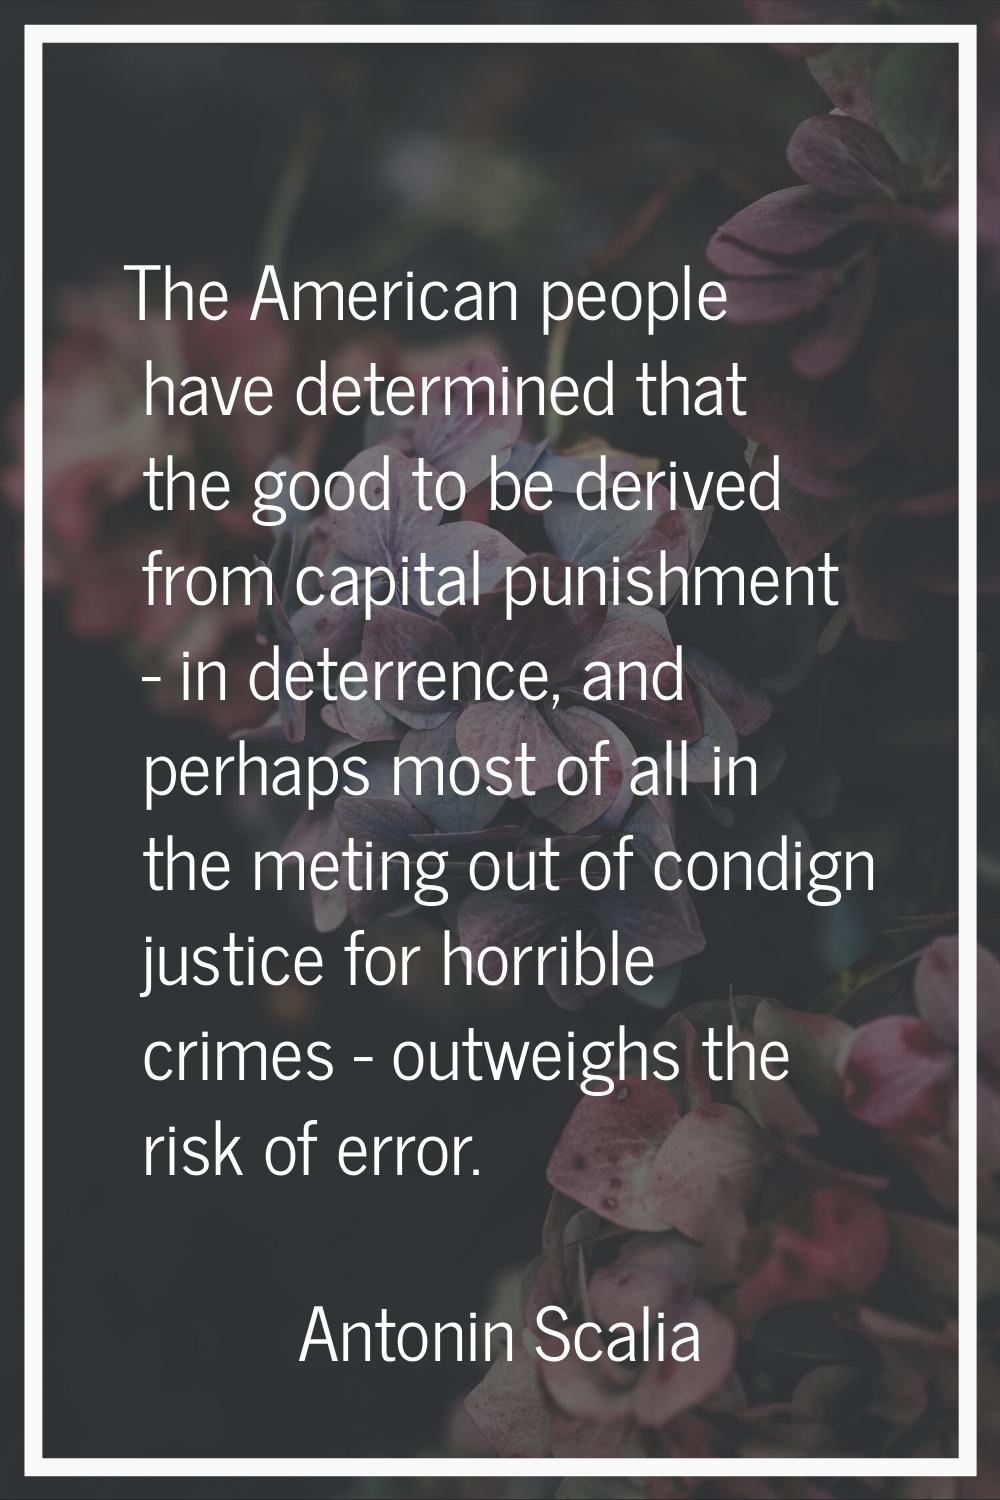 The American people have determined that the good to be derived from capital punishment - in deterr